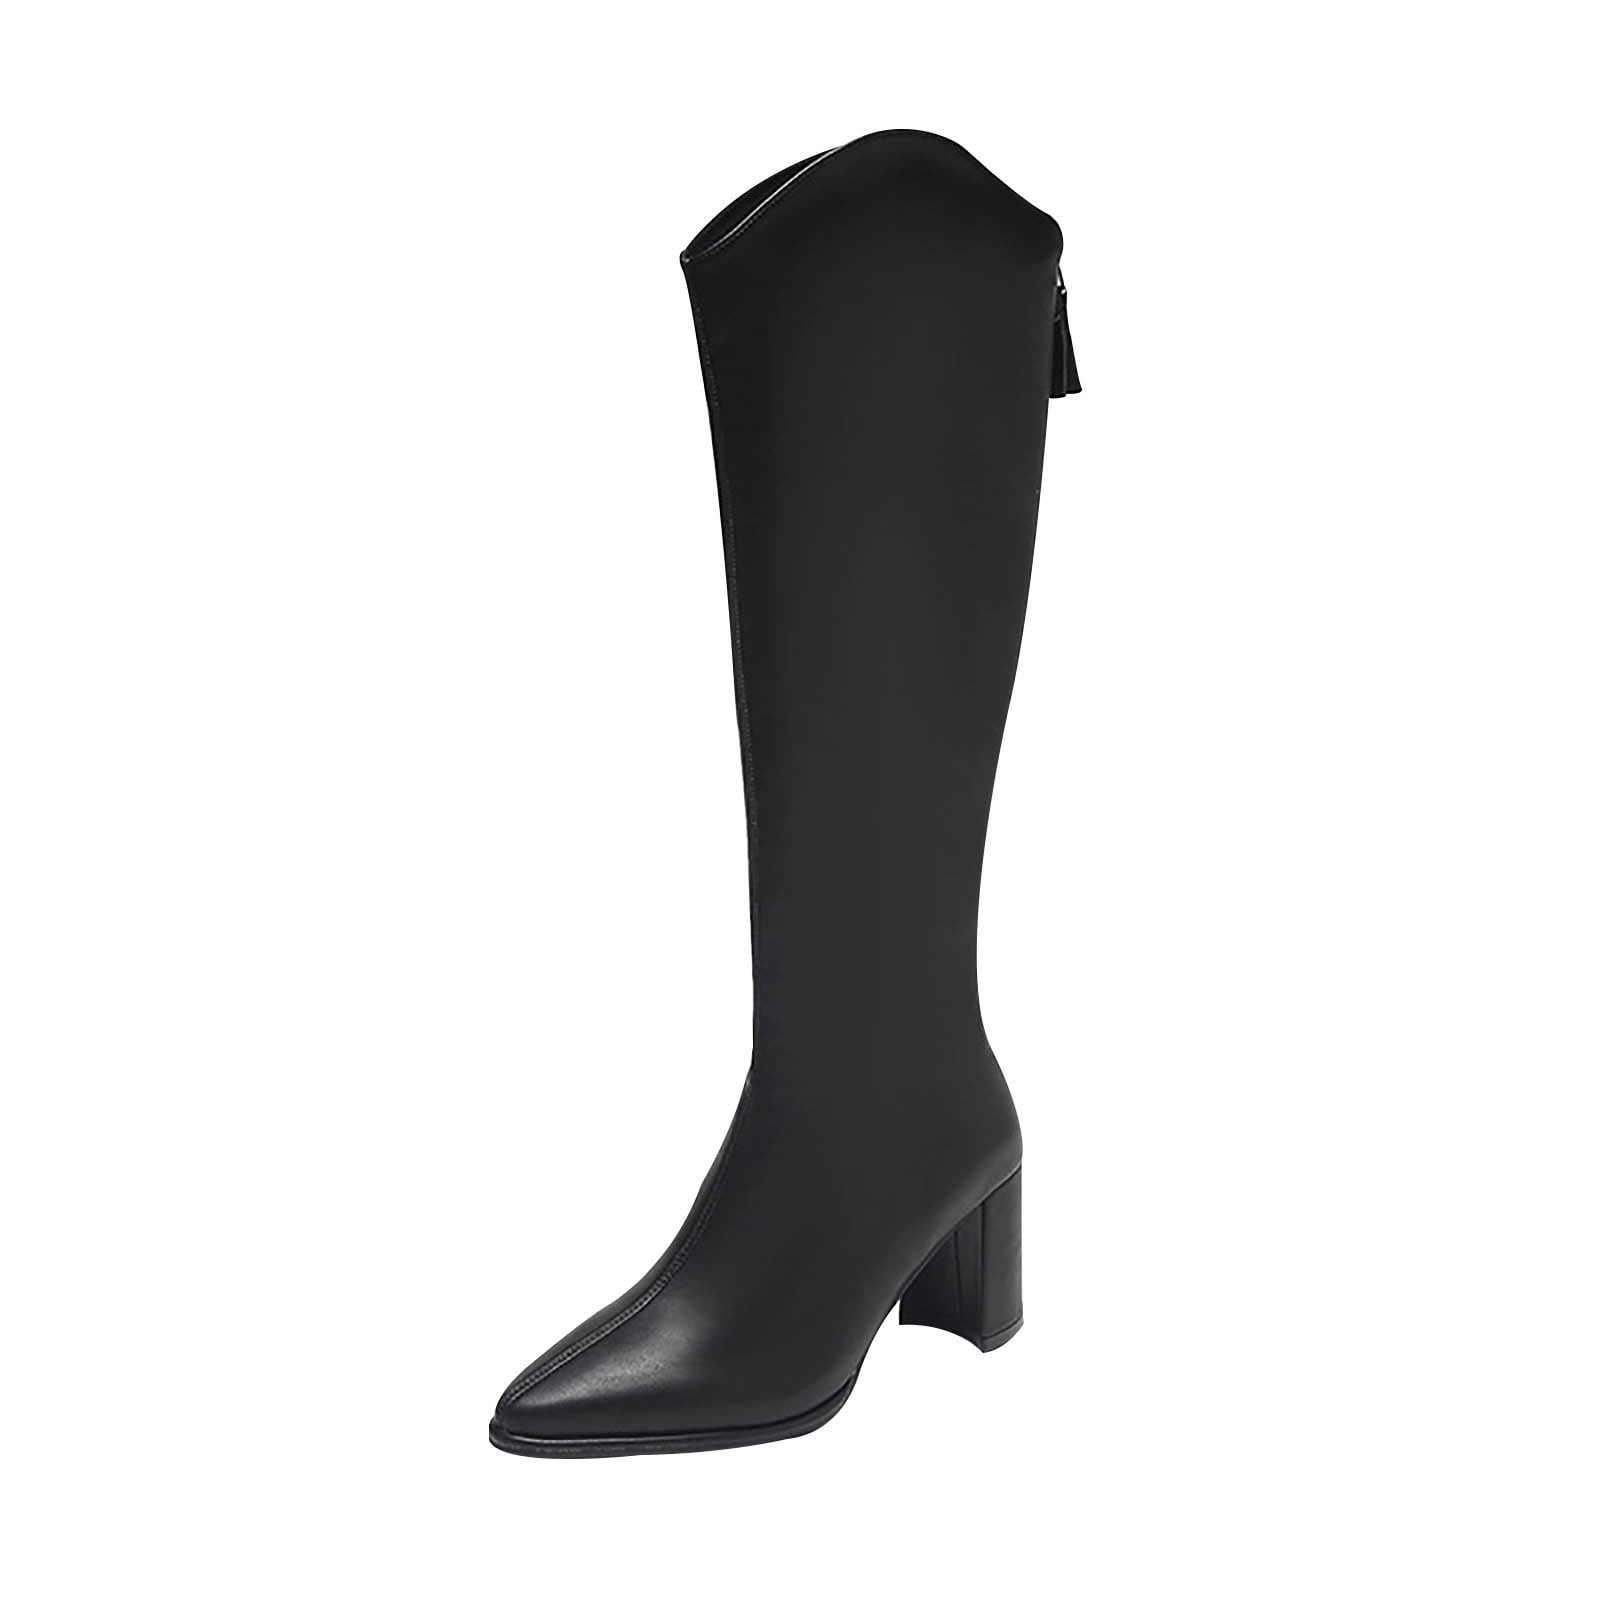 Jsaierl Knee High Boots for Women Gogo Boots 70s Boots,Leather Pointed ...